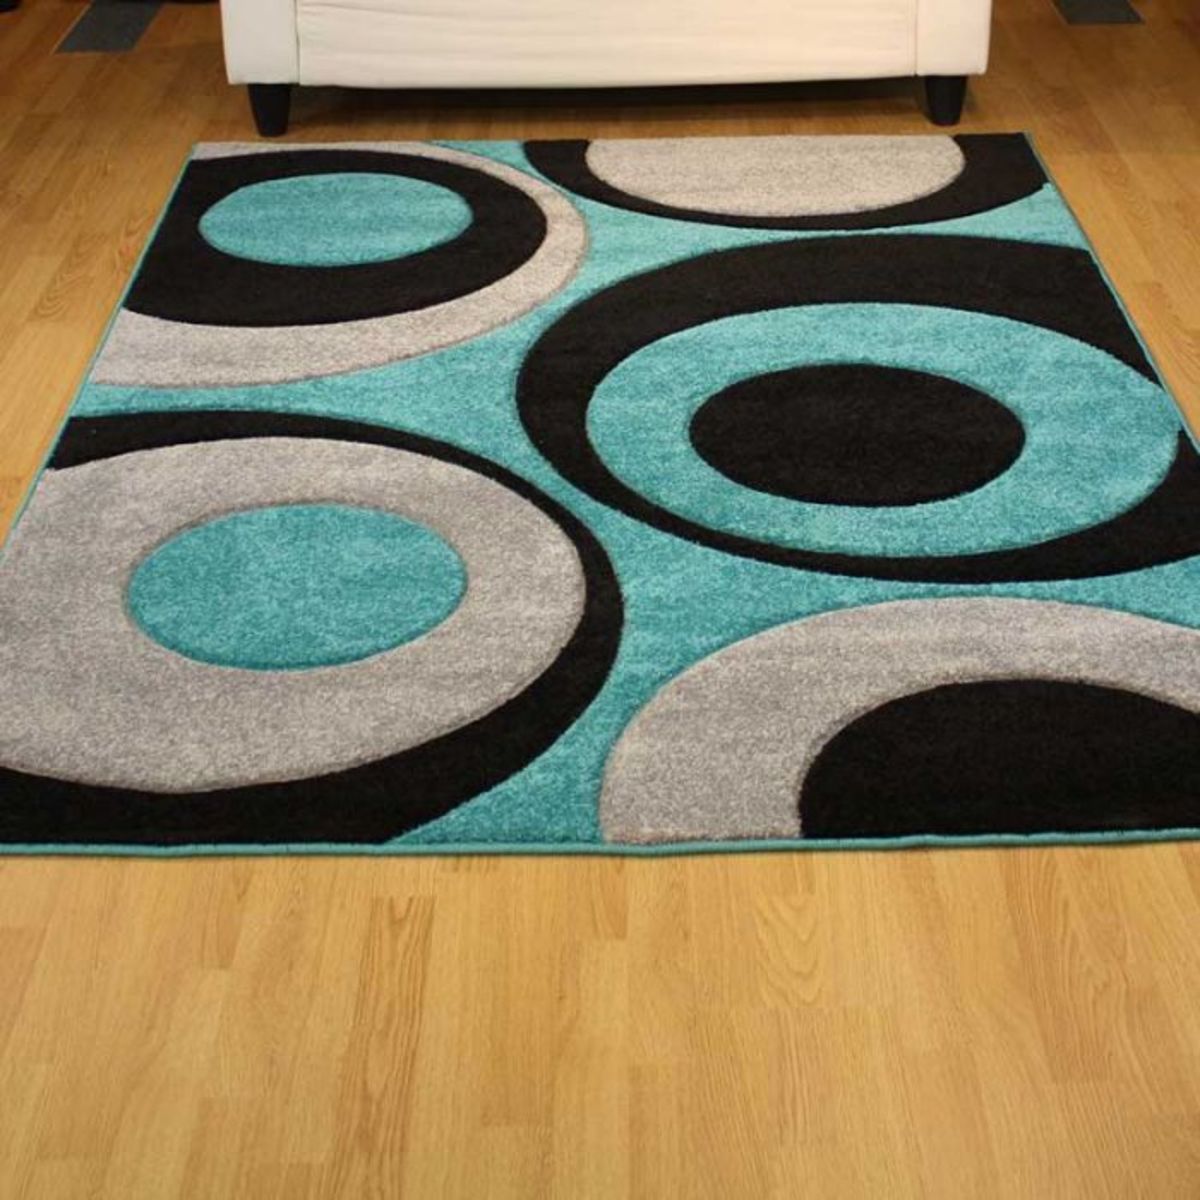 Rugs can add so much to a room.